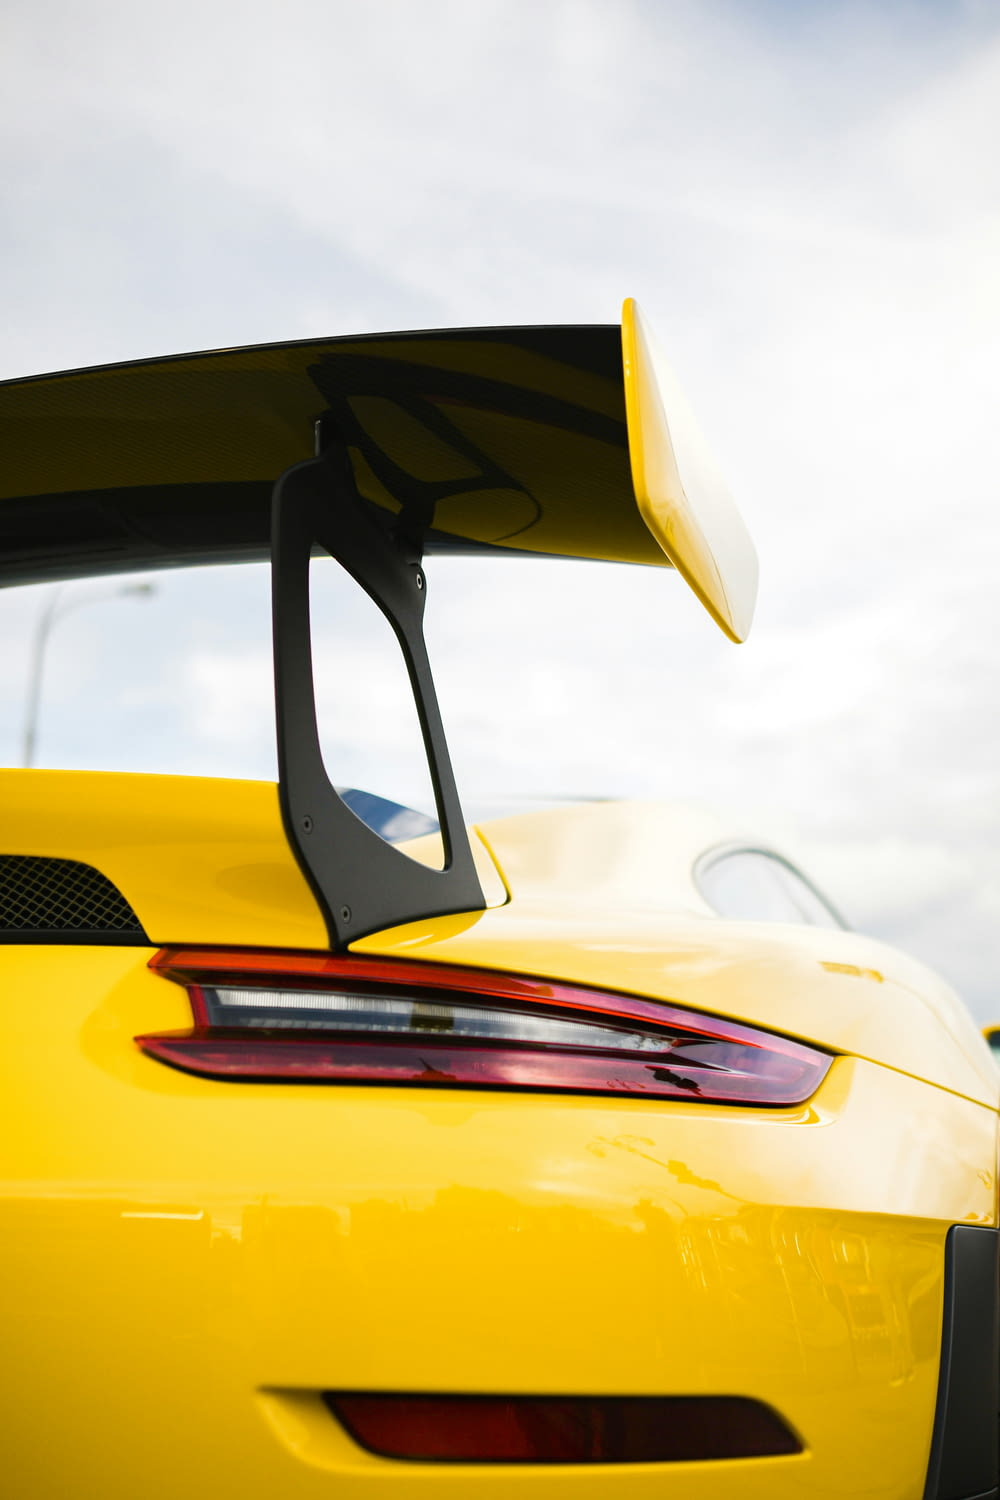 the rear end of a yellow sports car